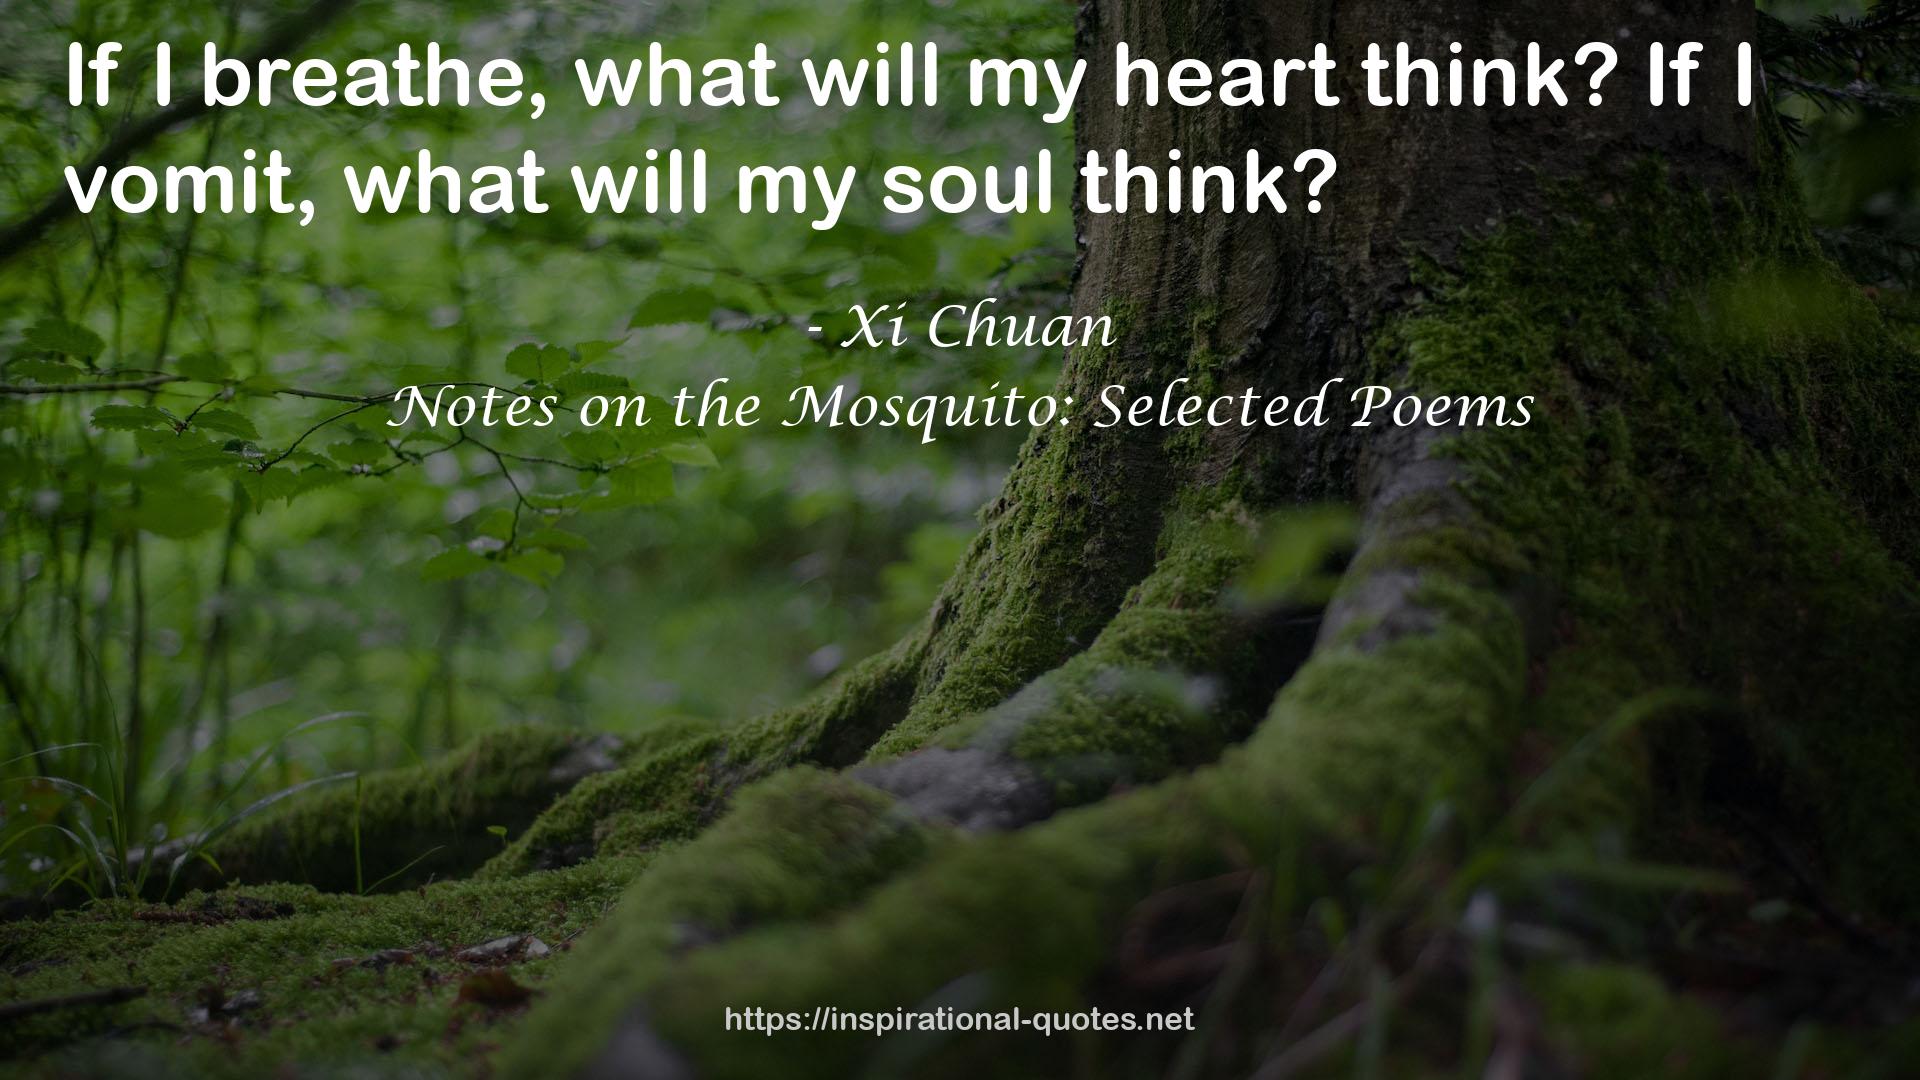 Notes on the Mosquito: Selected Poems QUOTES